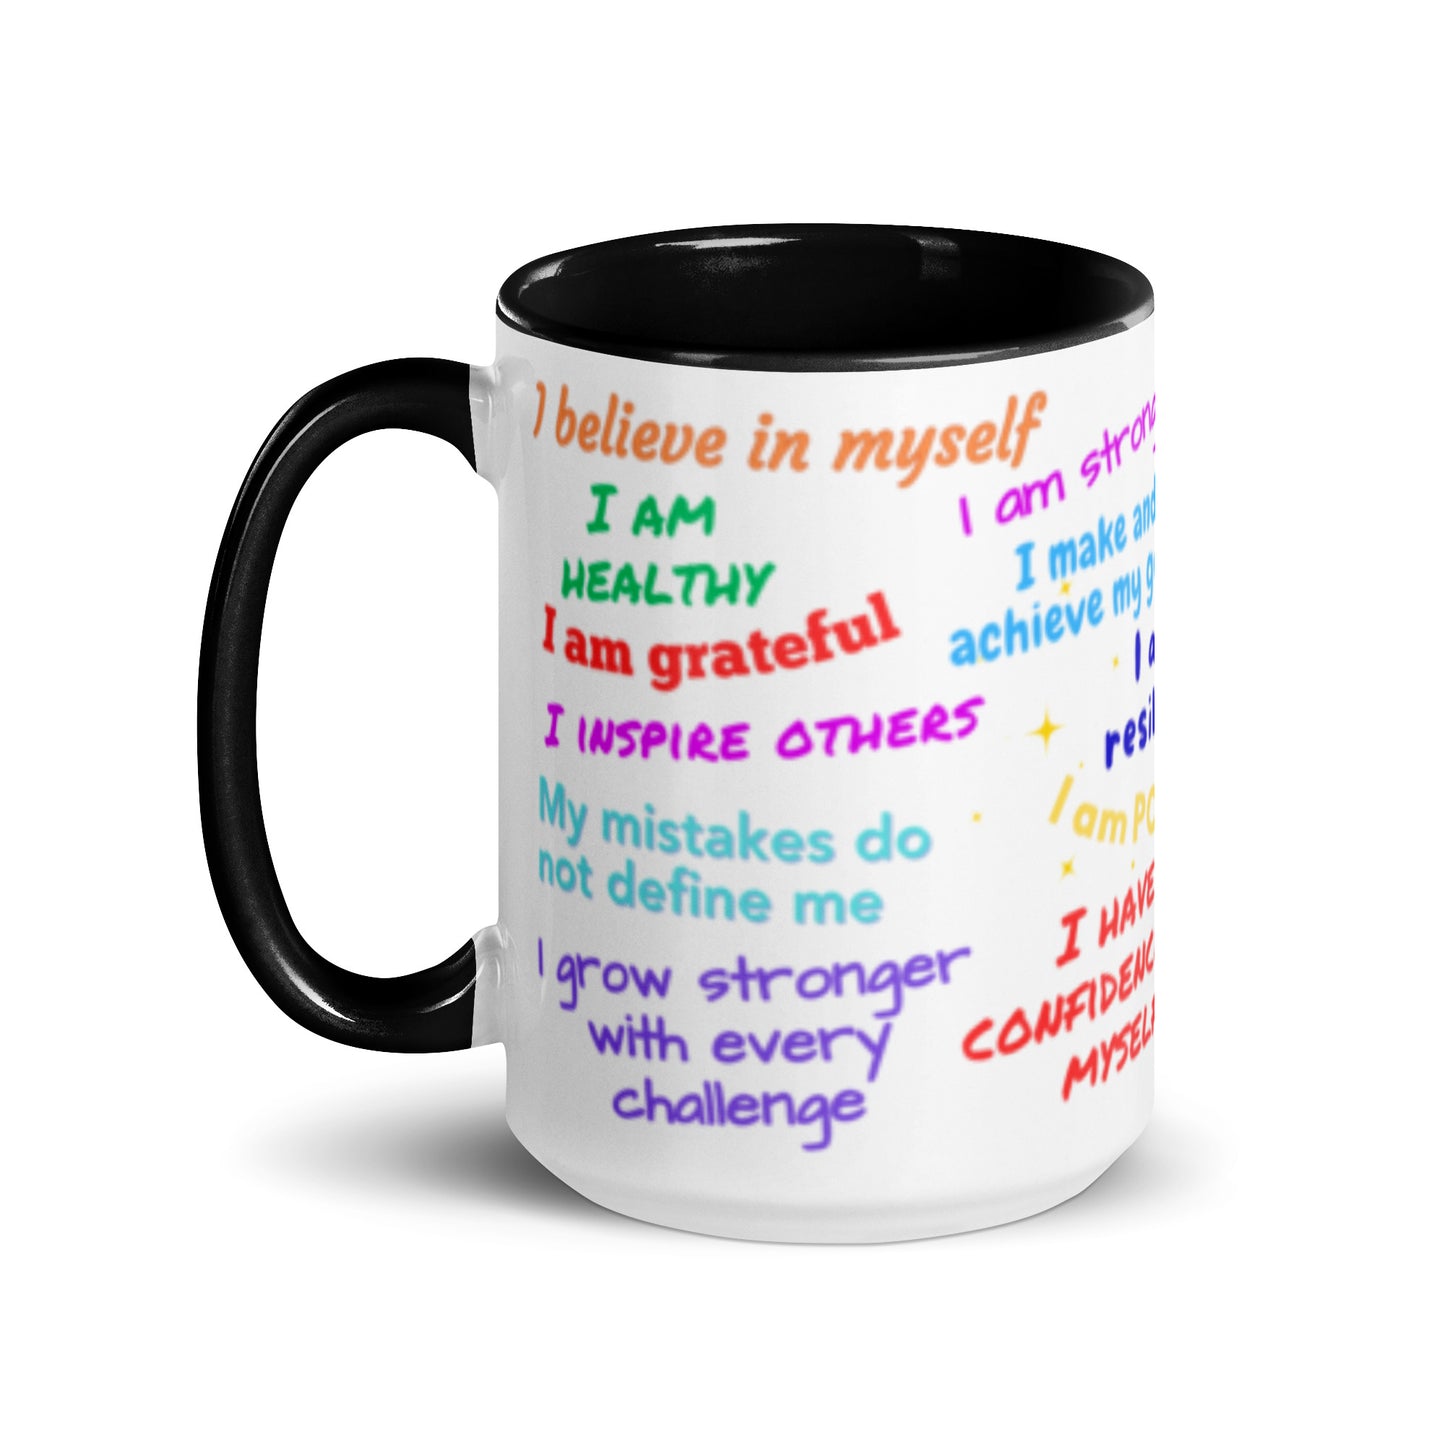 Mug with Color Inside - Daily Affirmations